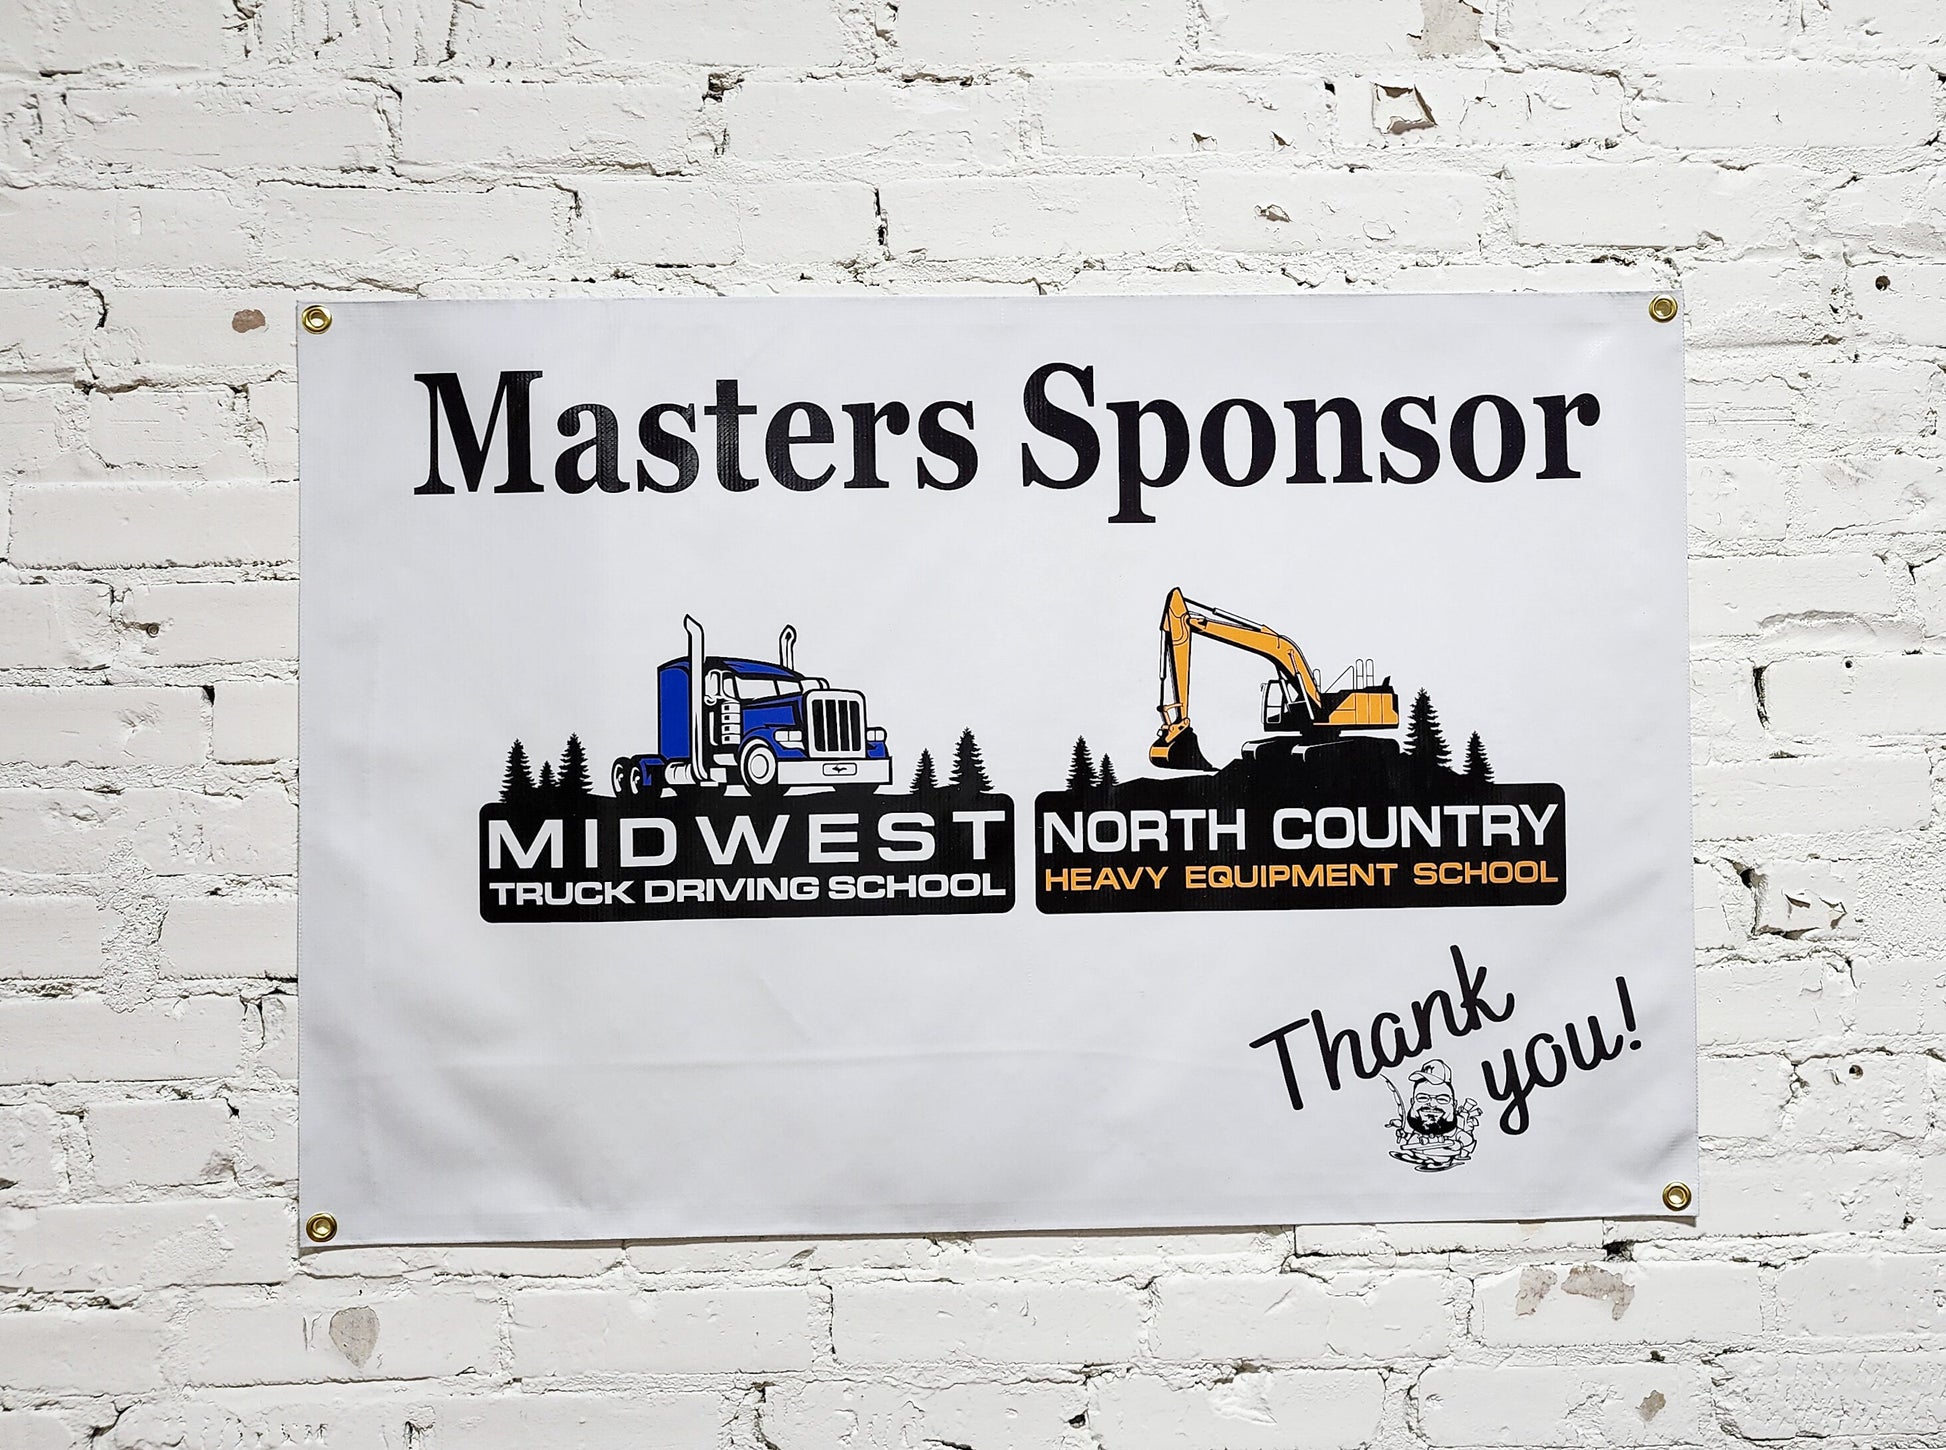 Sponsor Banner for community events, Sponsorshipship, Or Personalized Custom Text, Logo, Campaigns, Ads, Full Color Indoor Outdoor Print